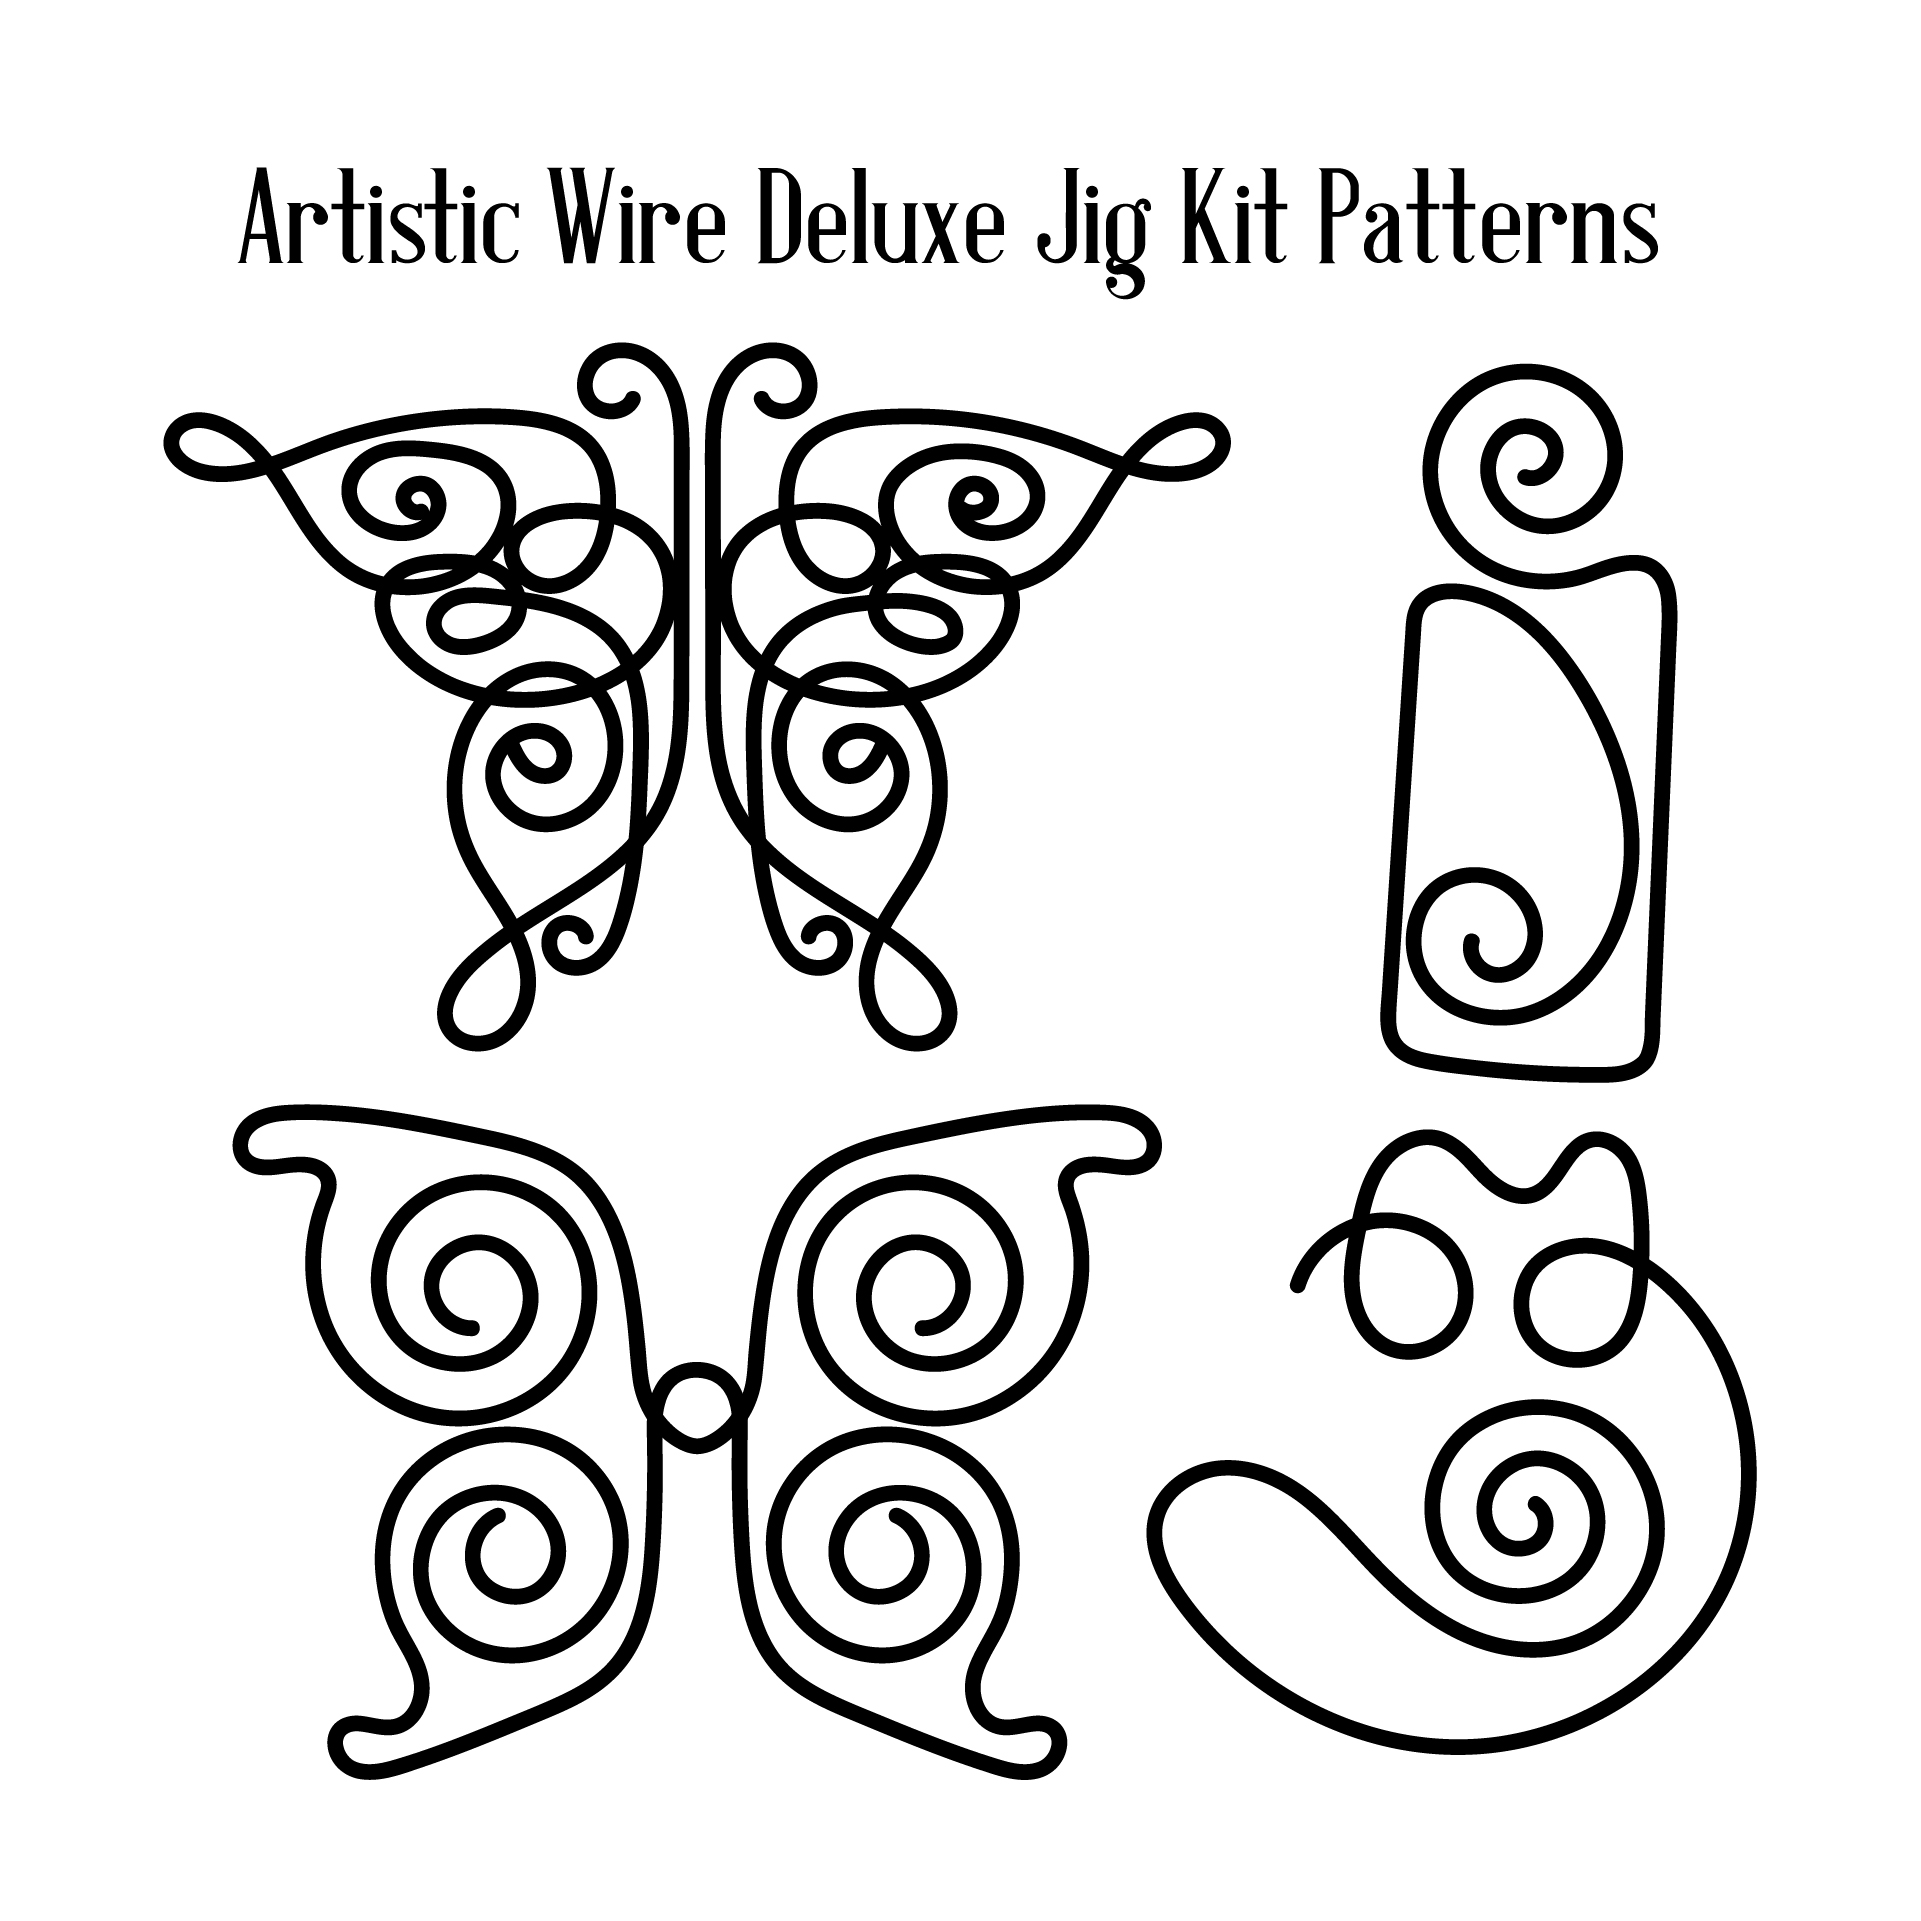 Artistic Wire Deluxe Jig Kit Patterns